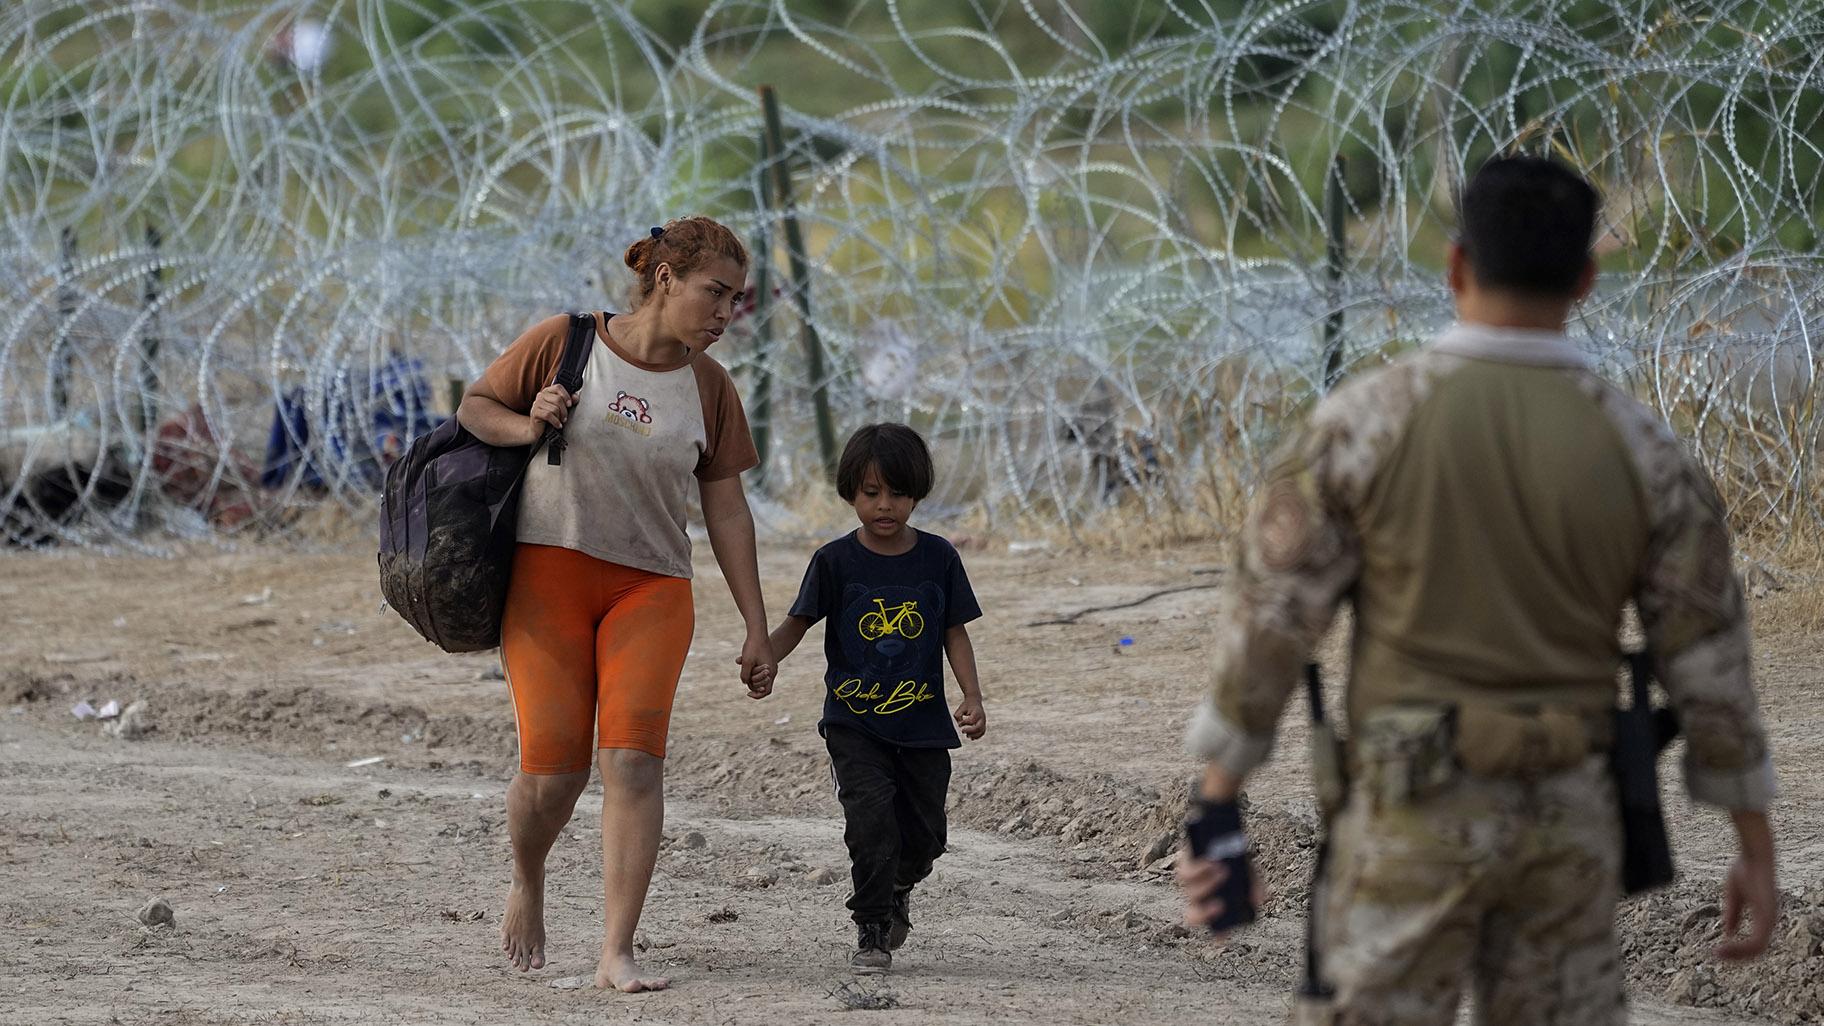 Migrants who crossed into the U.S. from Mexico walk past concertina wire lining the banks of the Rio Grande as they move to an area for processing, Sept. 21, 2023, in Eagle Pass, Texas. Migrants have always come to the U.S., but the immigration system now seems strained nationwide more than ever. (AP Photo / Eric Gay)